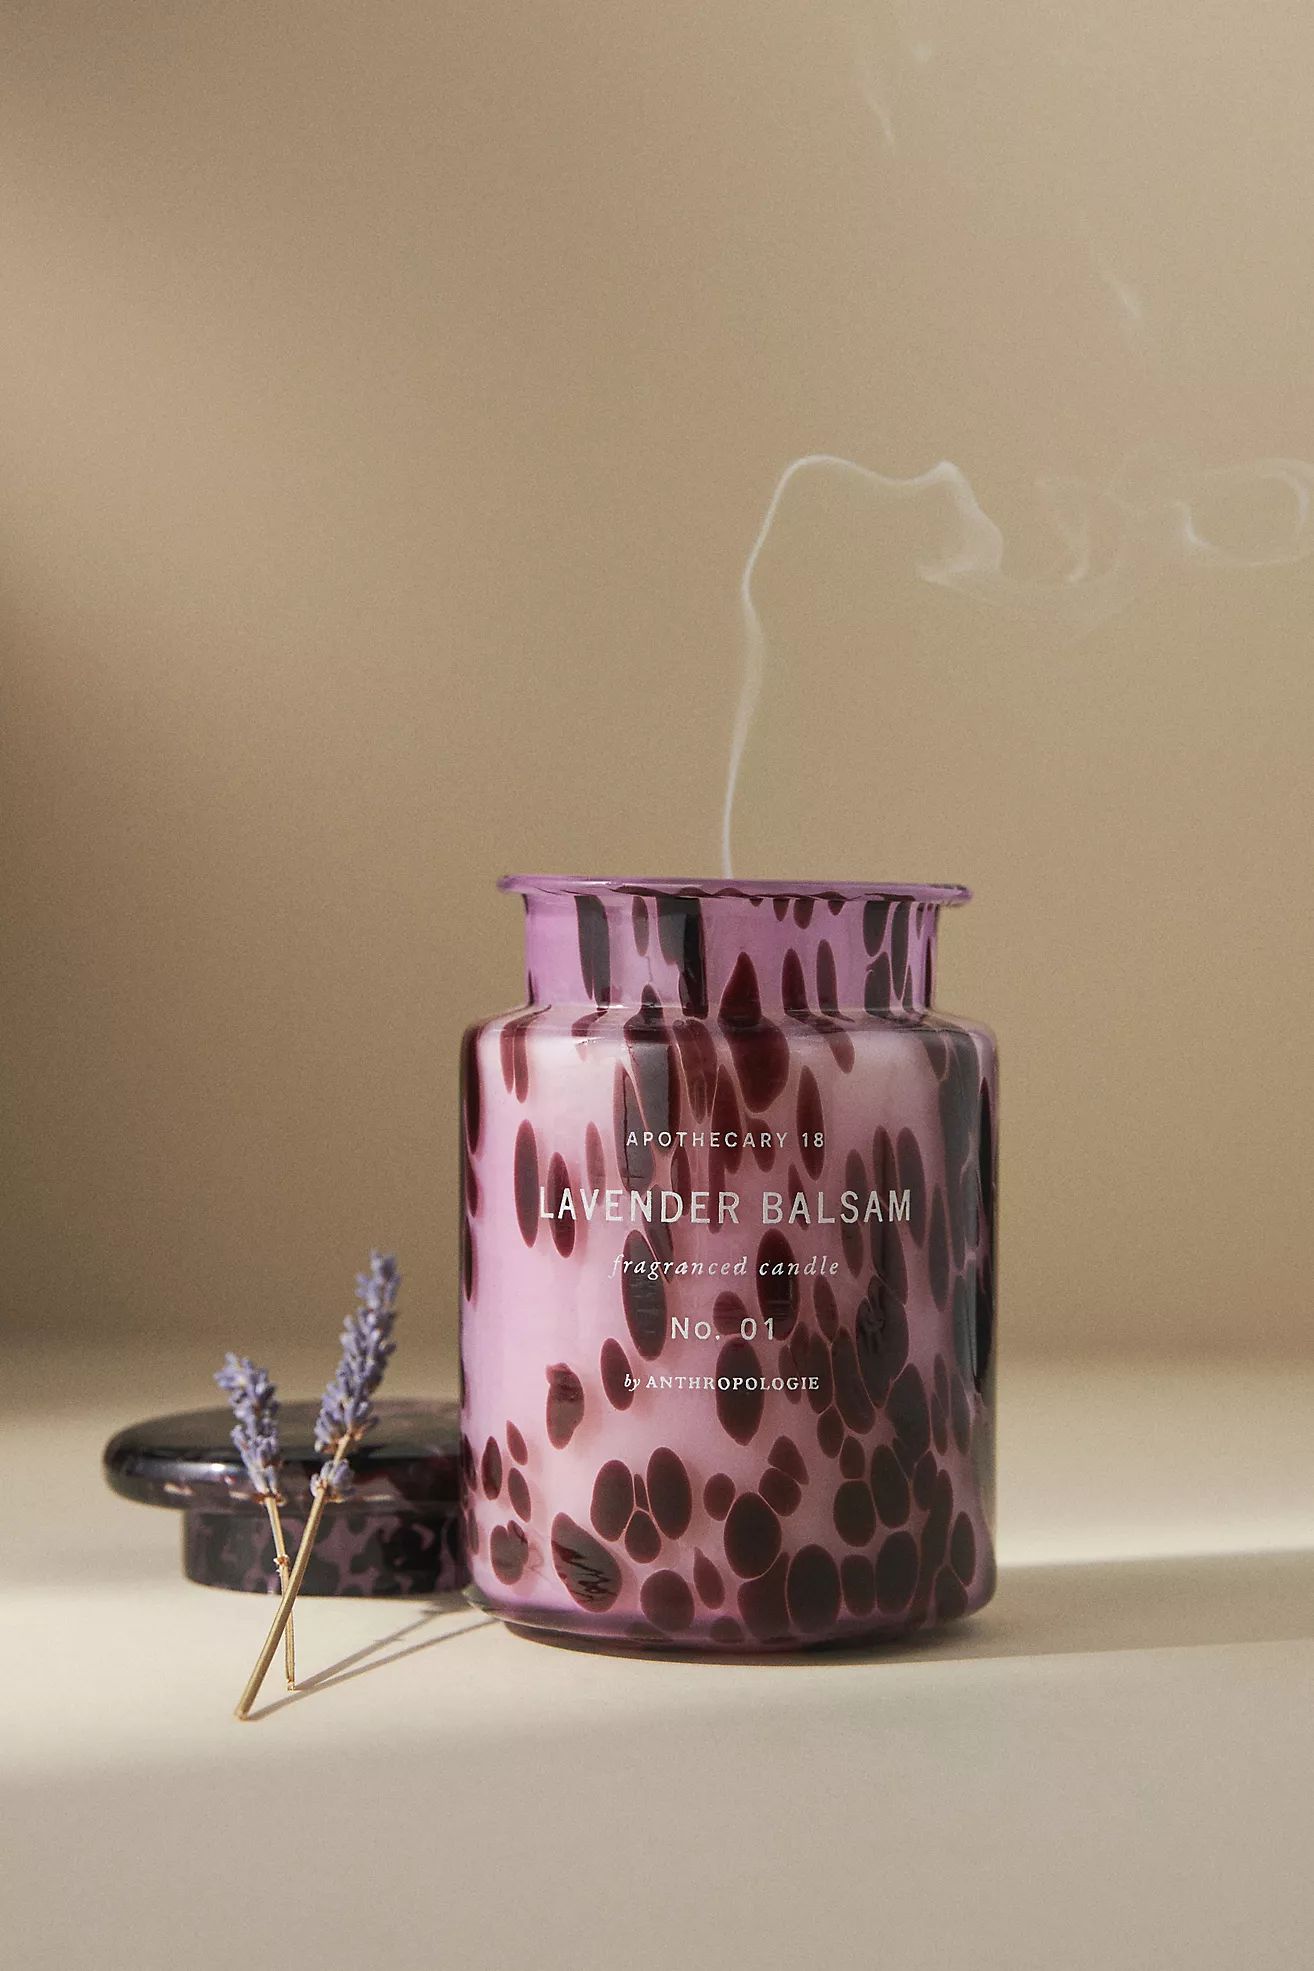 Apothecary 18 Fresh Lavender & Balsam Jar Candle | Anthropologie (US)